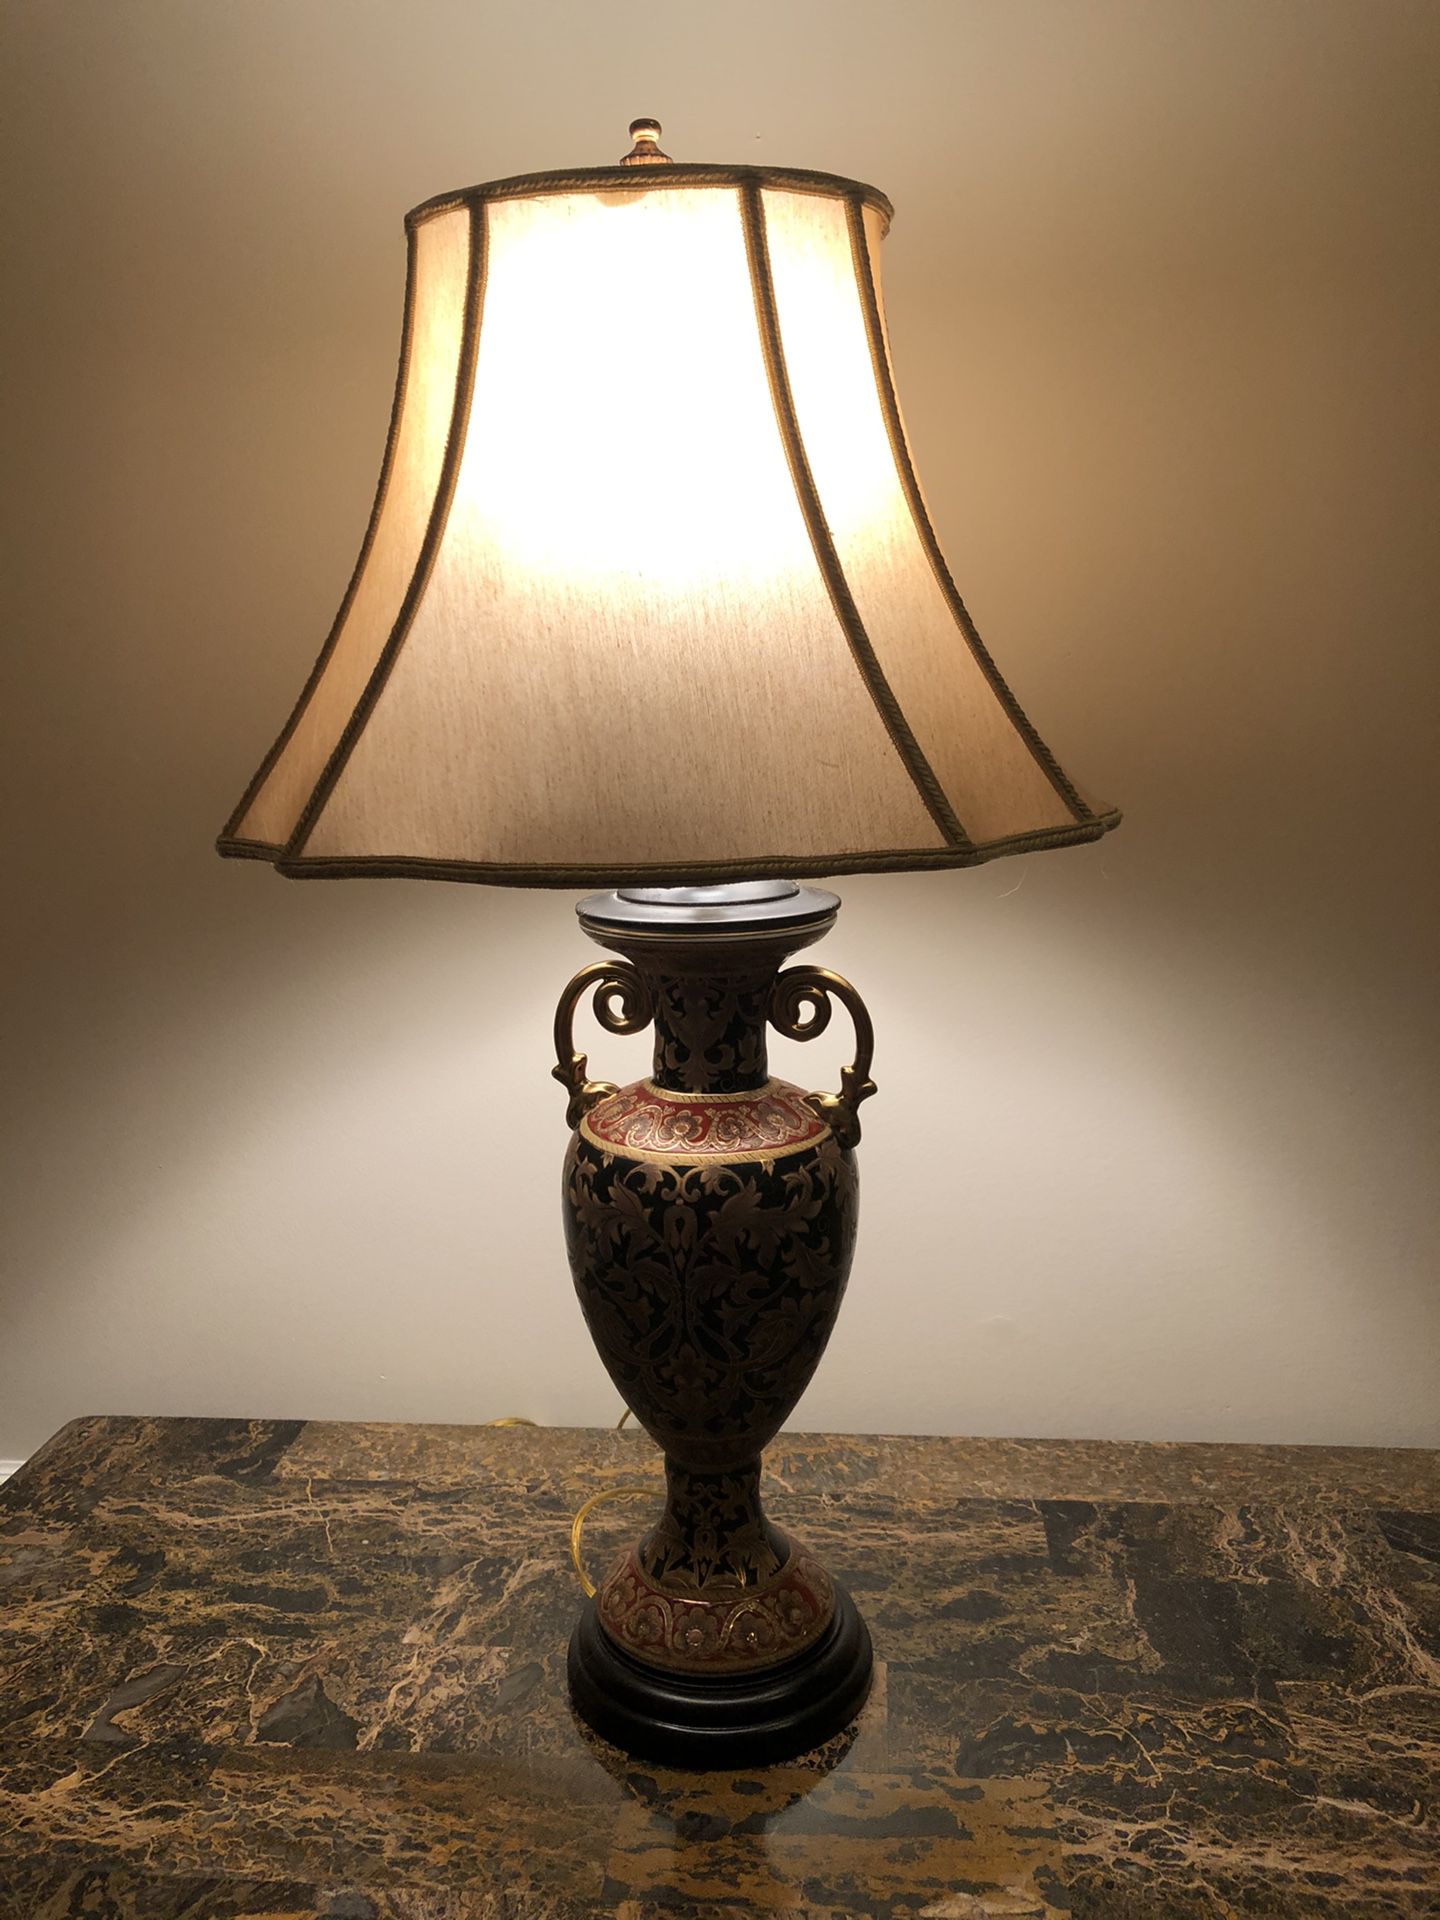 Ceramic 31 inch Lamp can use a 3 way bulb